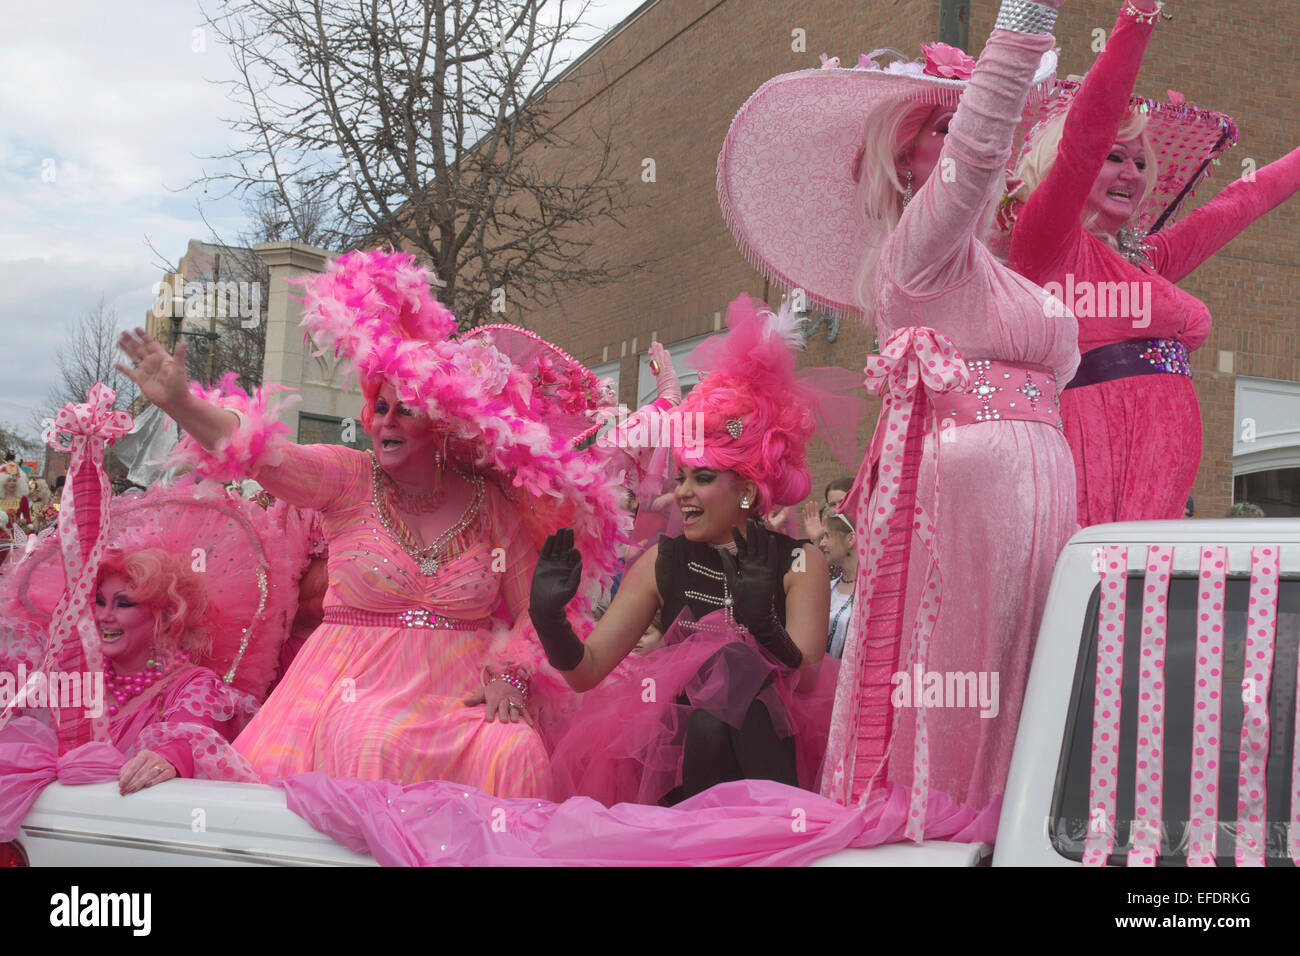 https://c8.alamy.com/comp/EFDRKG/frilly-costumed-ladies-all-in-pink-with-pink-skin-ride-and-wave-to-EFDRKG.jpg